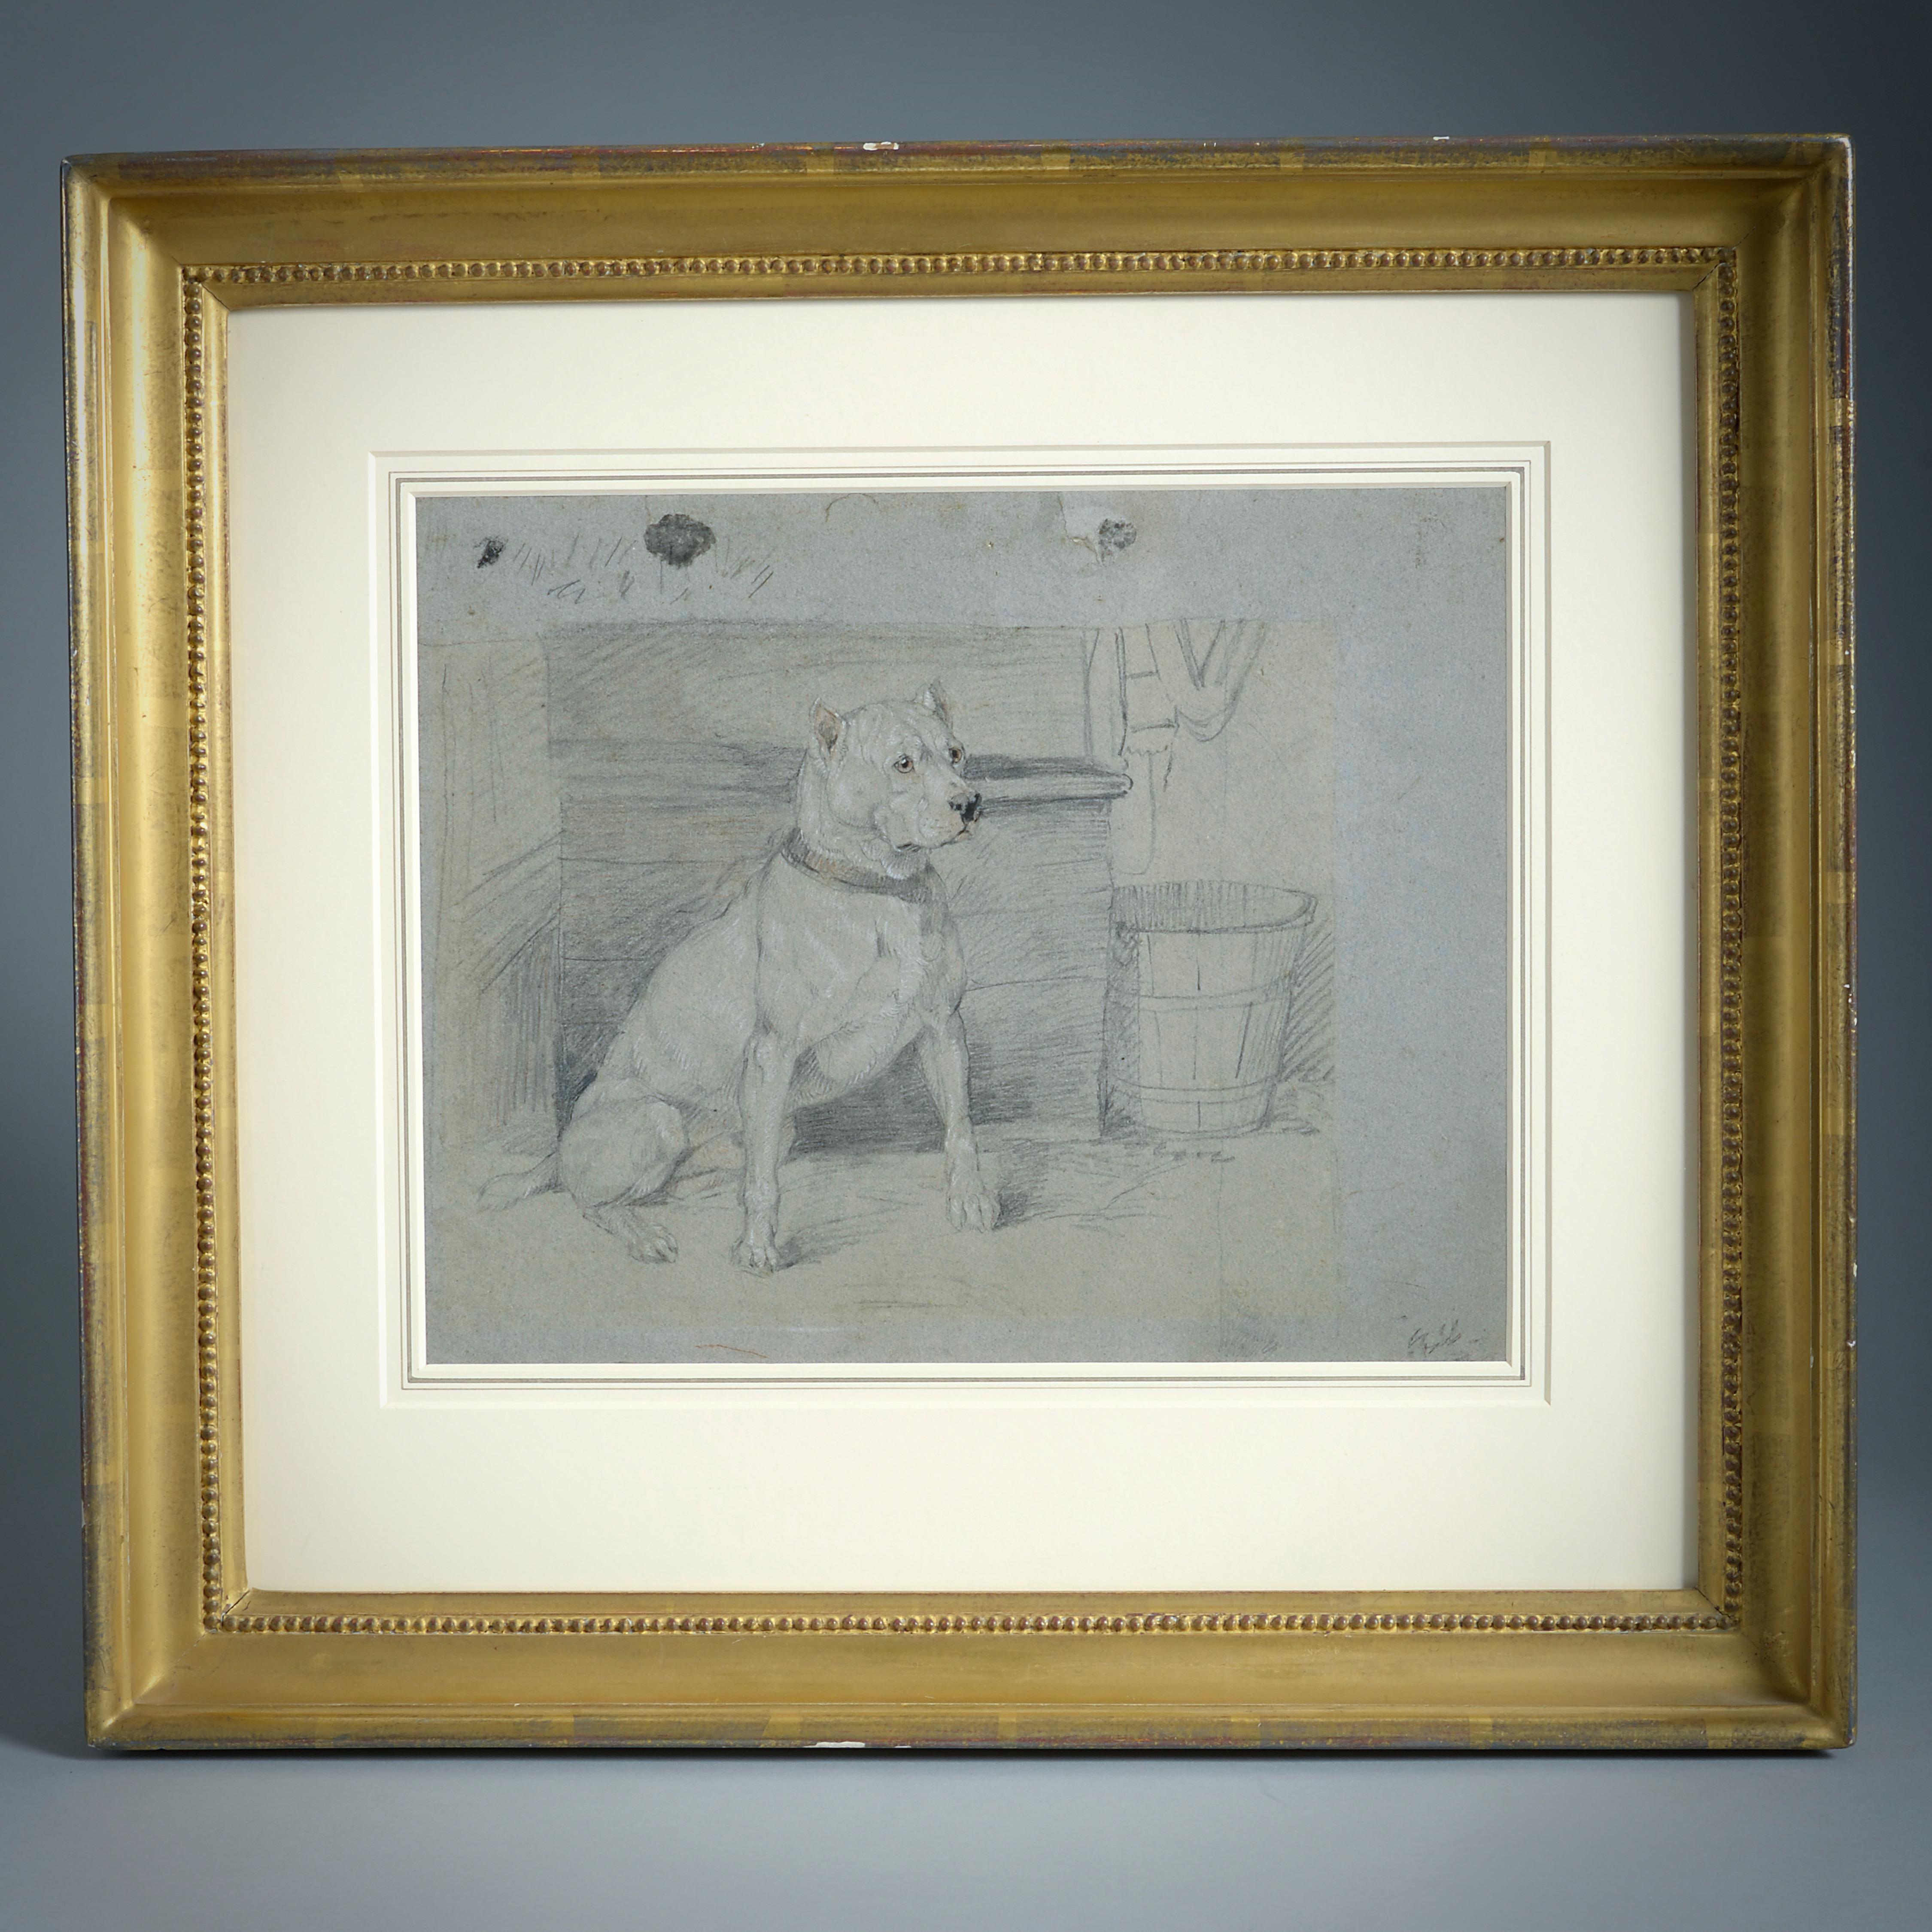 Sir Edwin Henry Landseer, R.A. (LONDON 1802-1873)

Study of 'Brutus'

Pencil and touches of red and white chalk and black ink on grey paper in a gilt-wood frame.

Measures: 11.25in. (28.5cm) high; 15.75in. (34.5cm) wide.
Framed: 19in. (48cm)